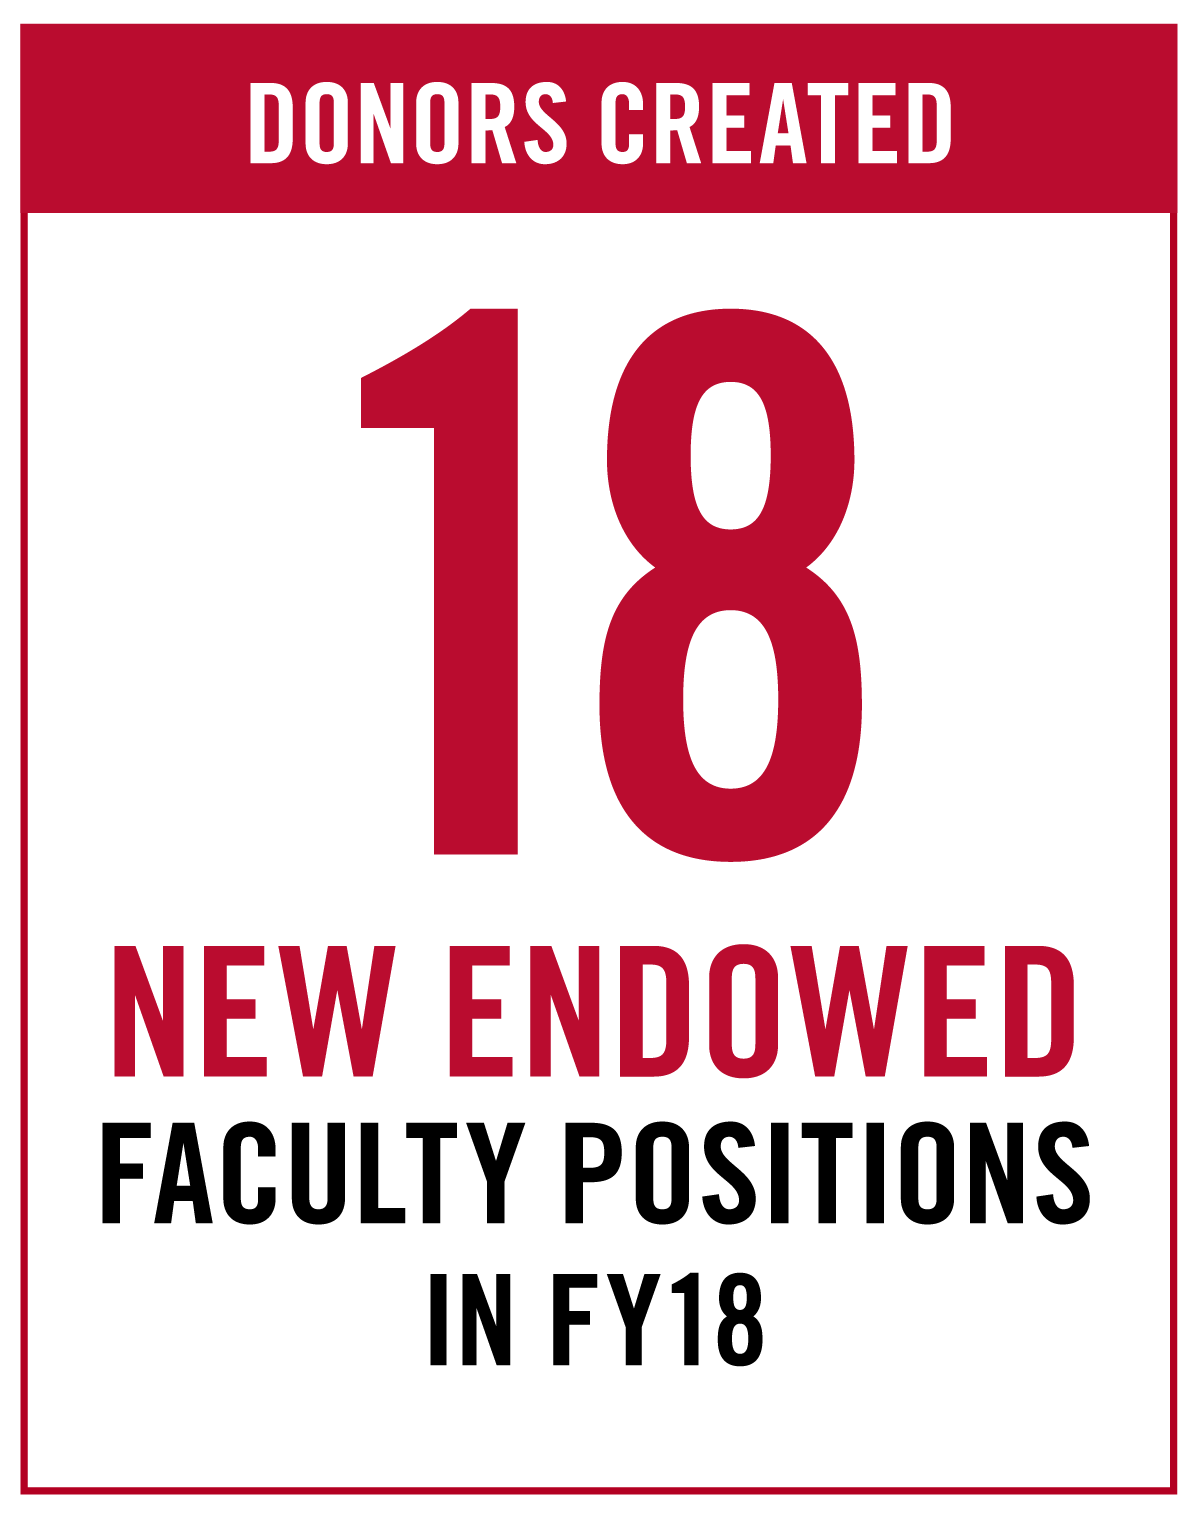 Donors created 18 new endowed faculty positions in FY18